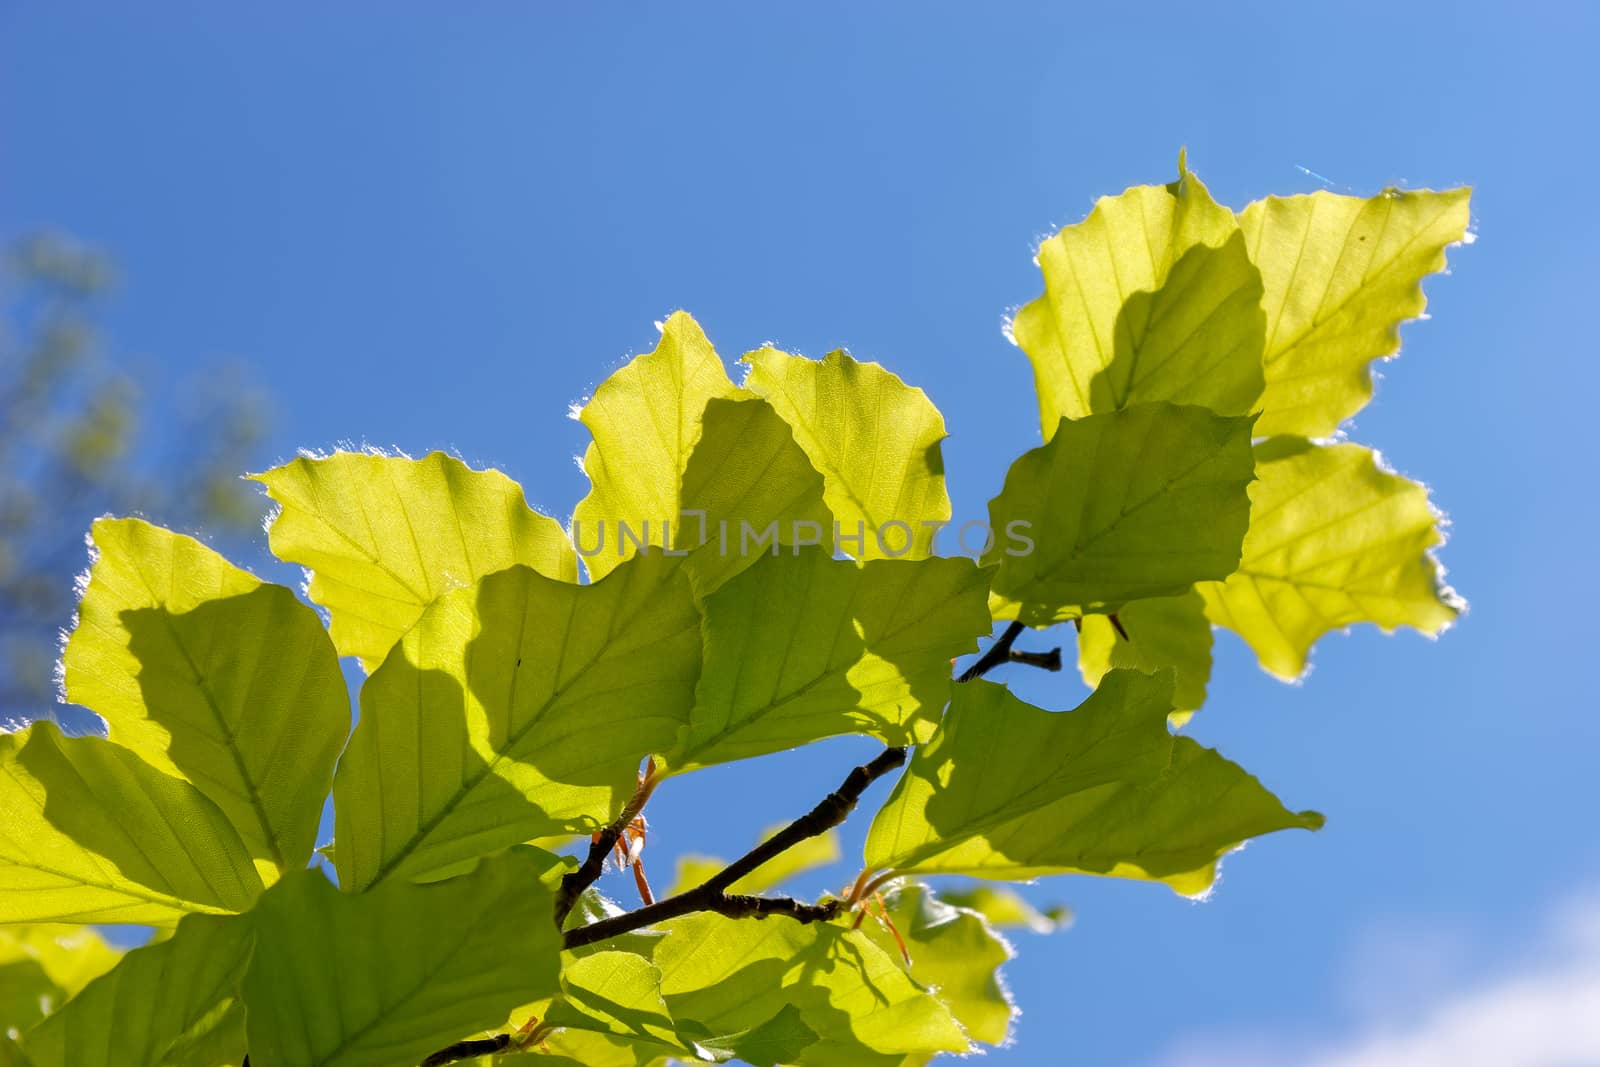 Close-up of some leaves of a Beech (fagaceae) tree in an english by phil_bird